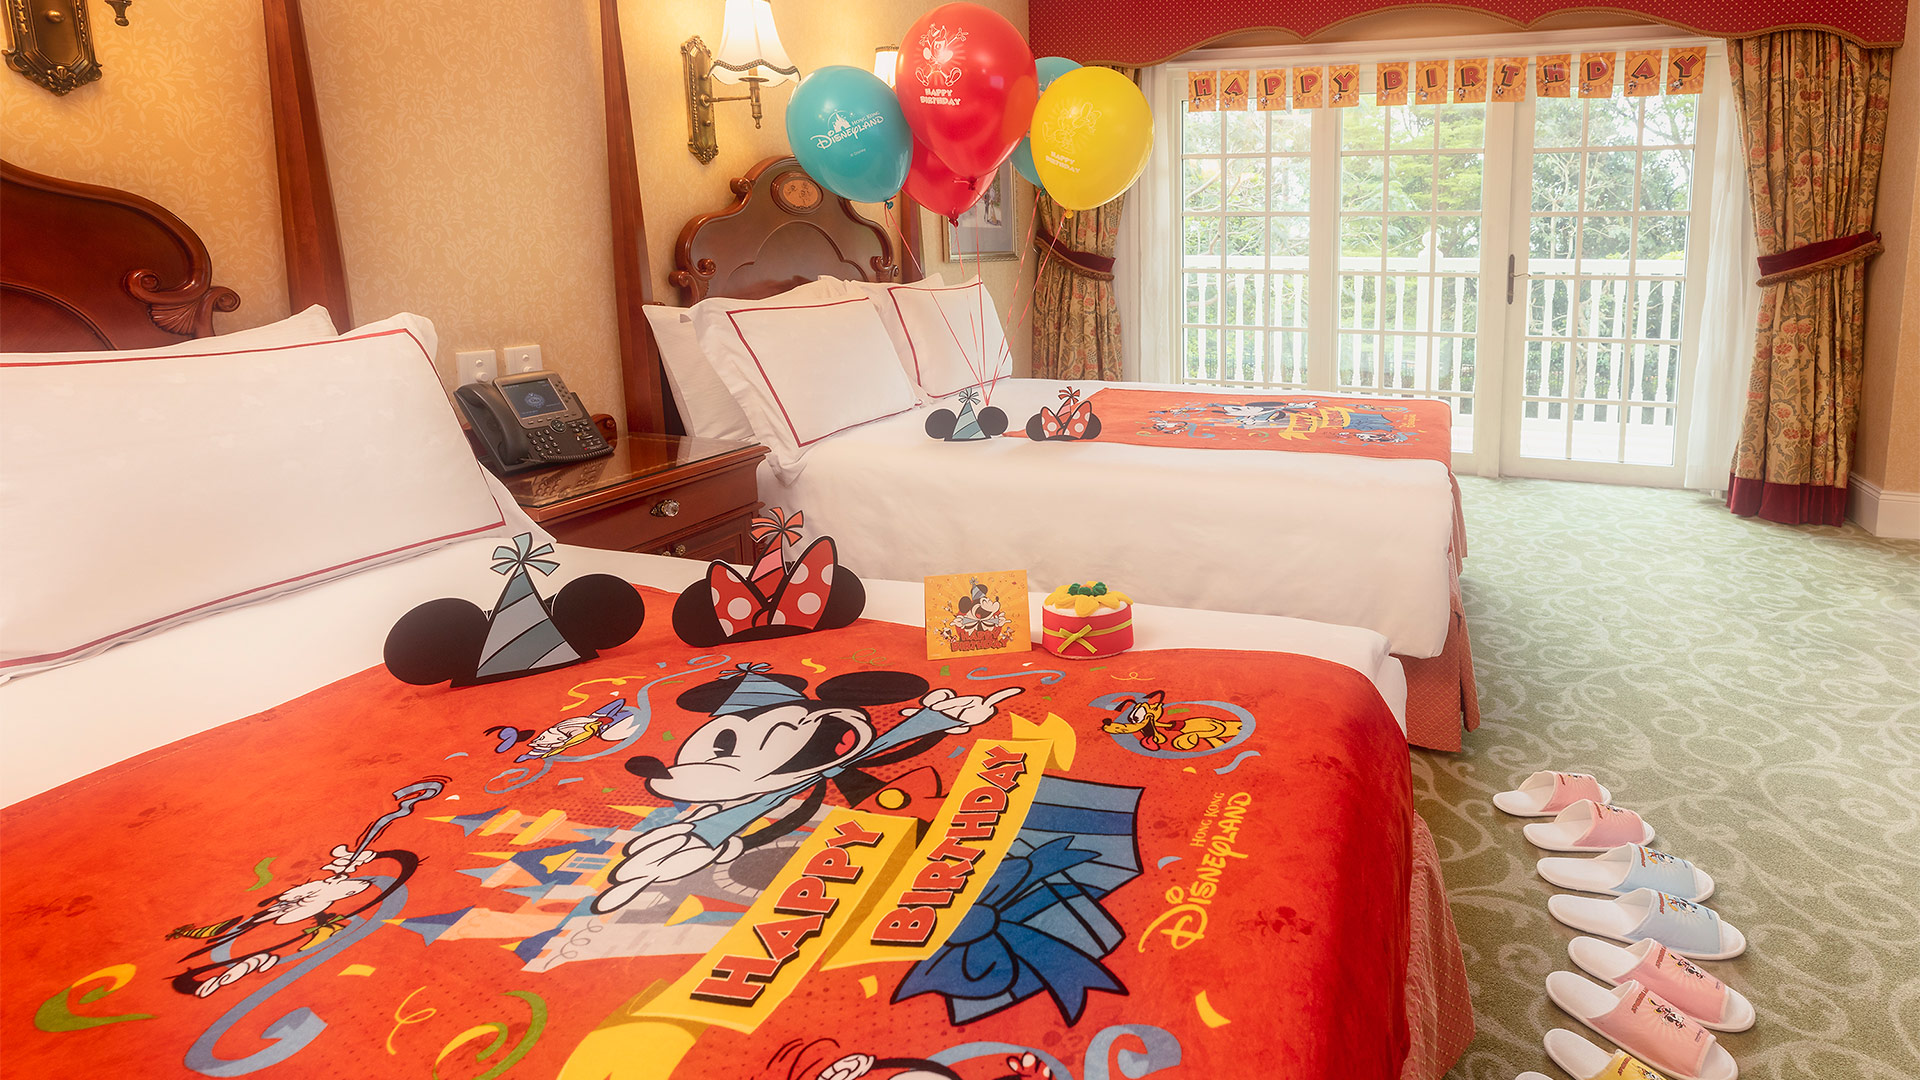 Make your stay more special with a room decoration overlay at Hong Kong Disneyland Resort’s hotels